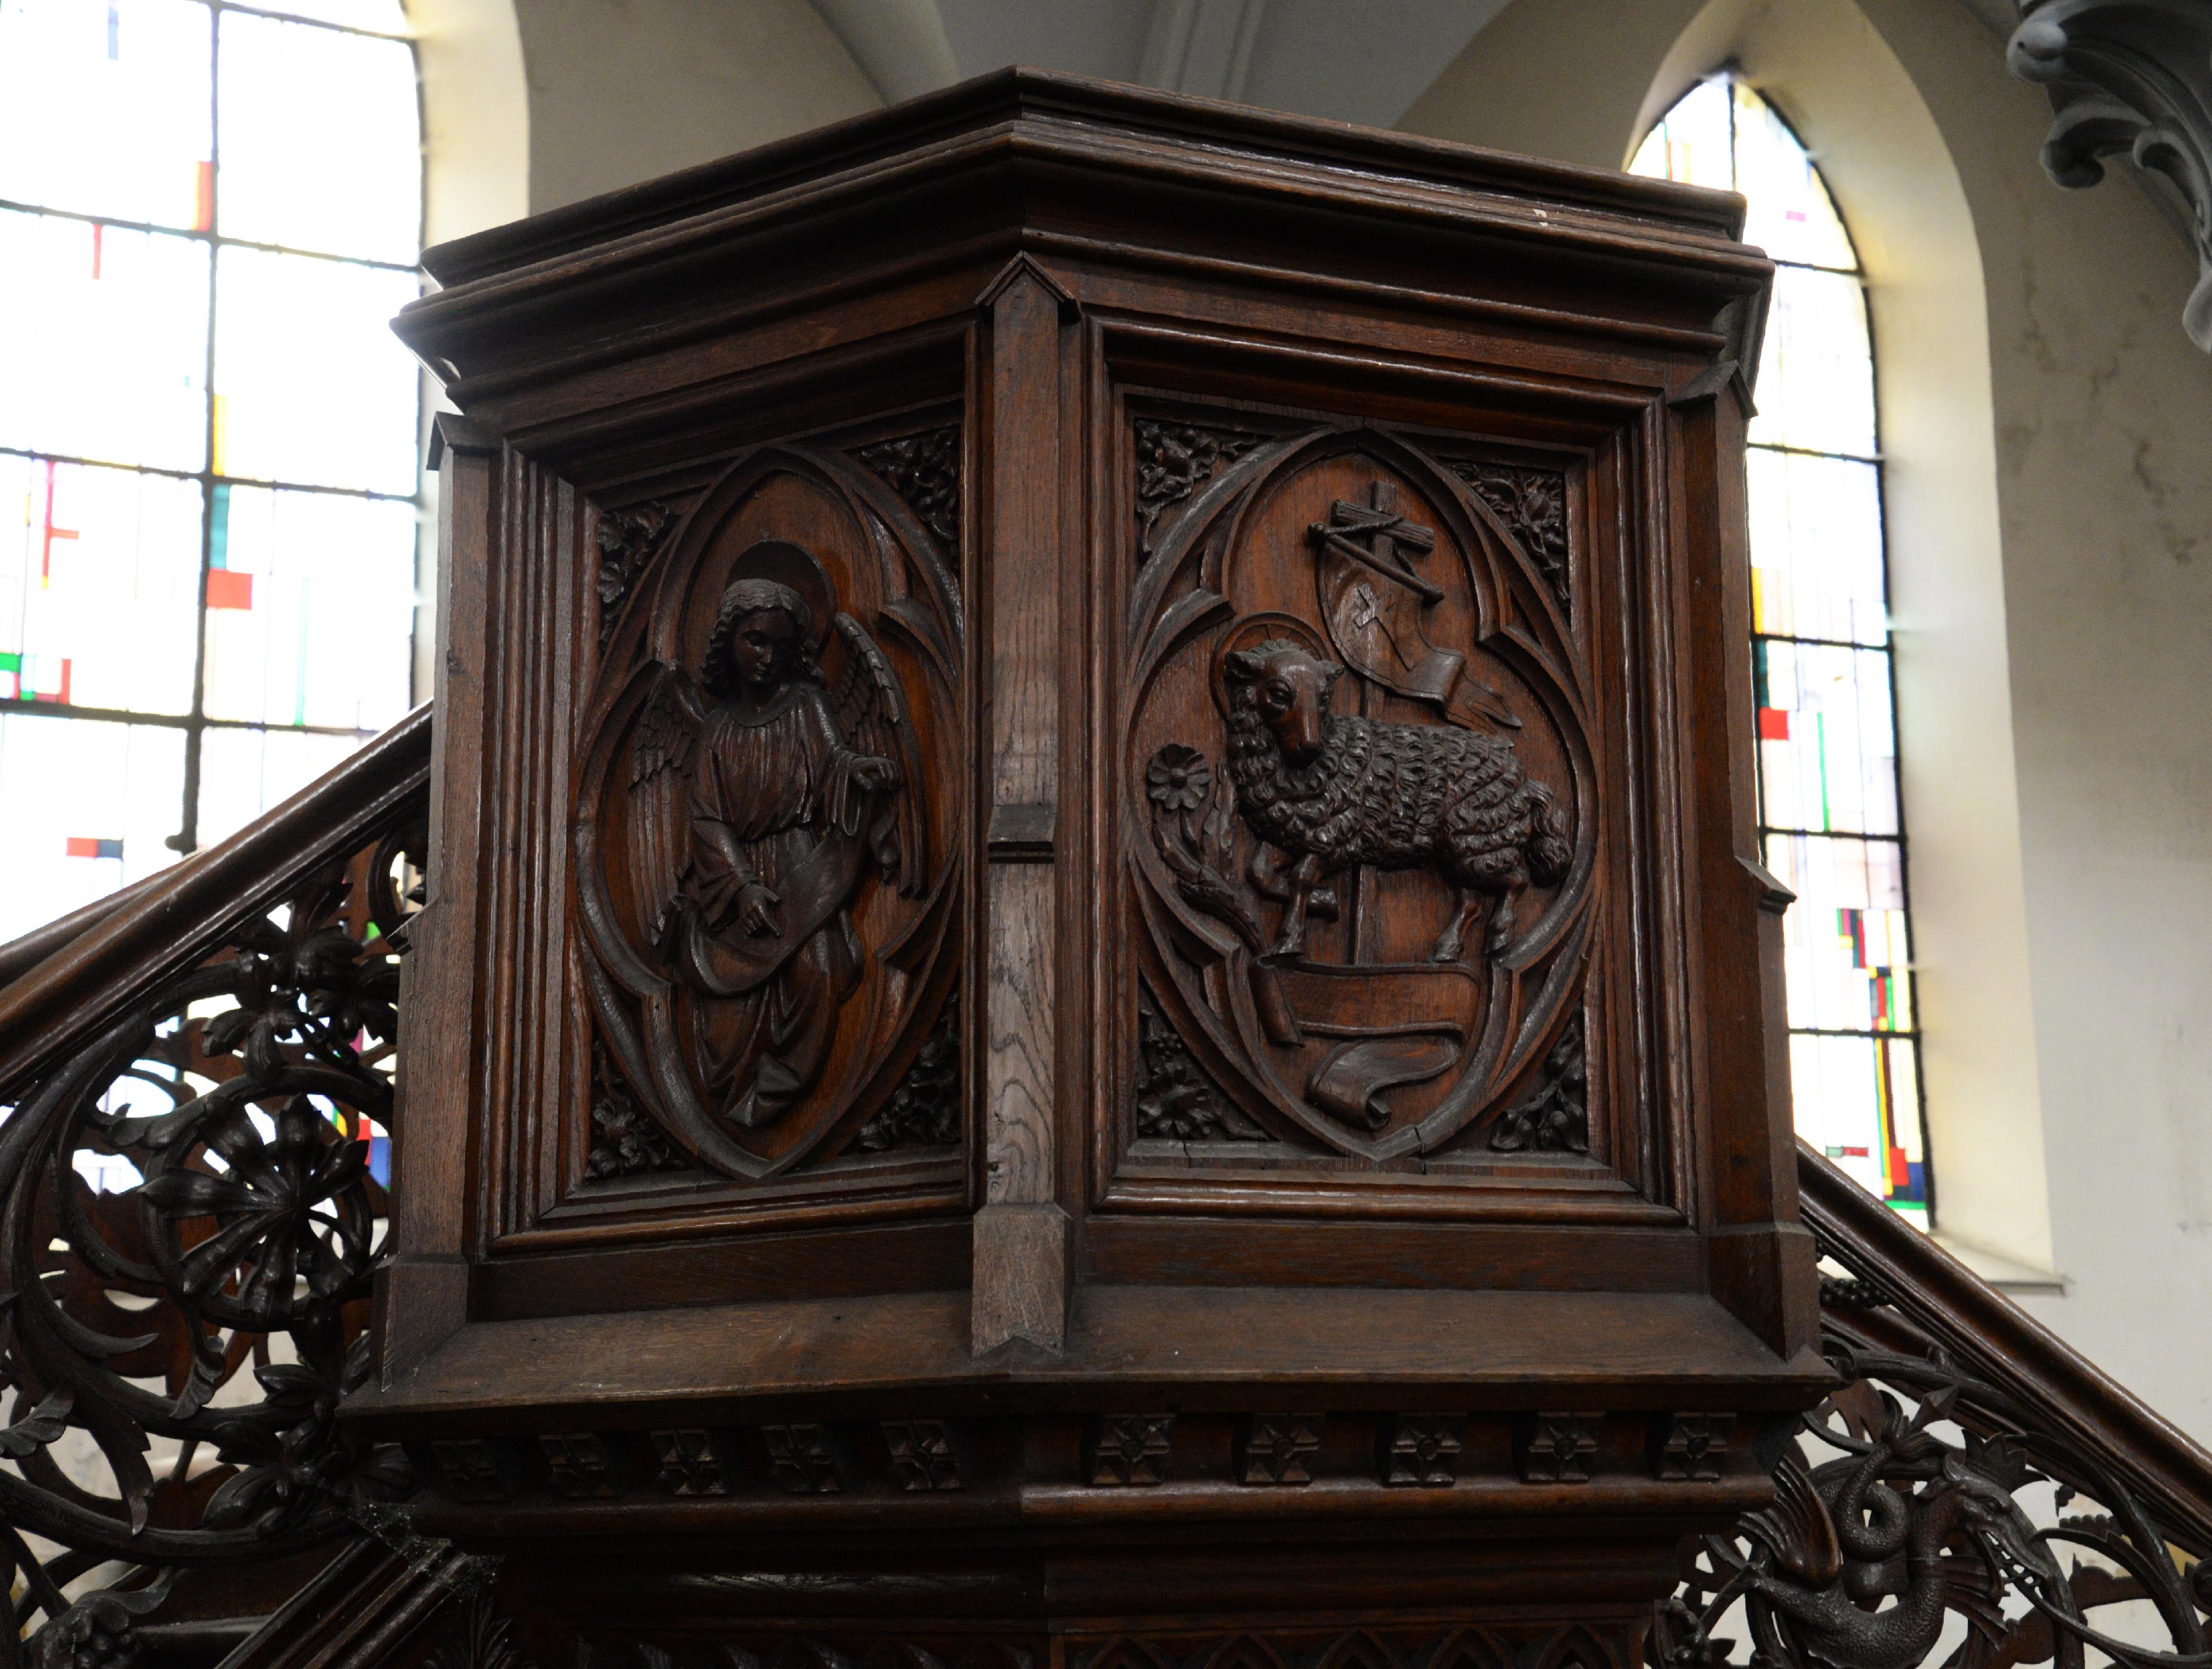 Pulpit in oak with double flight of stairs richly carved with monsters.